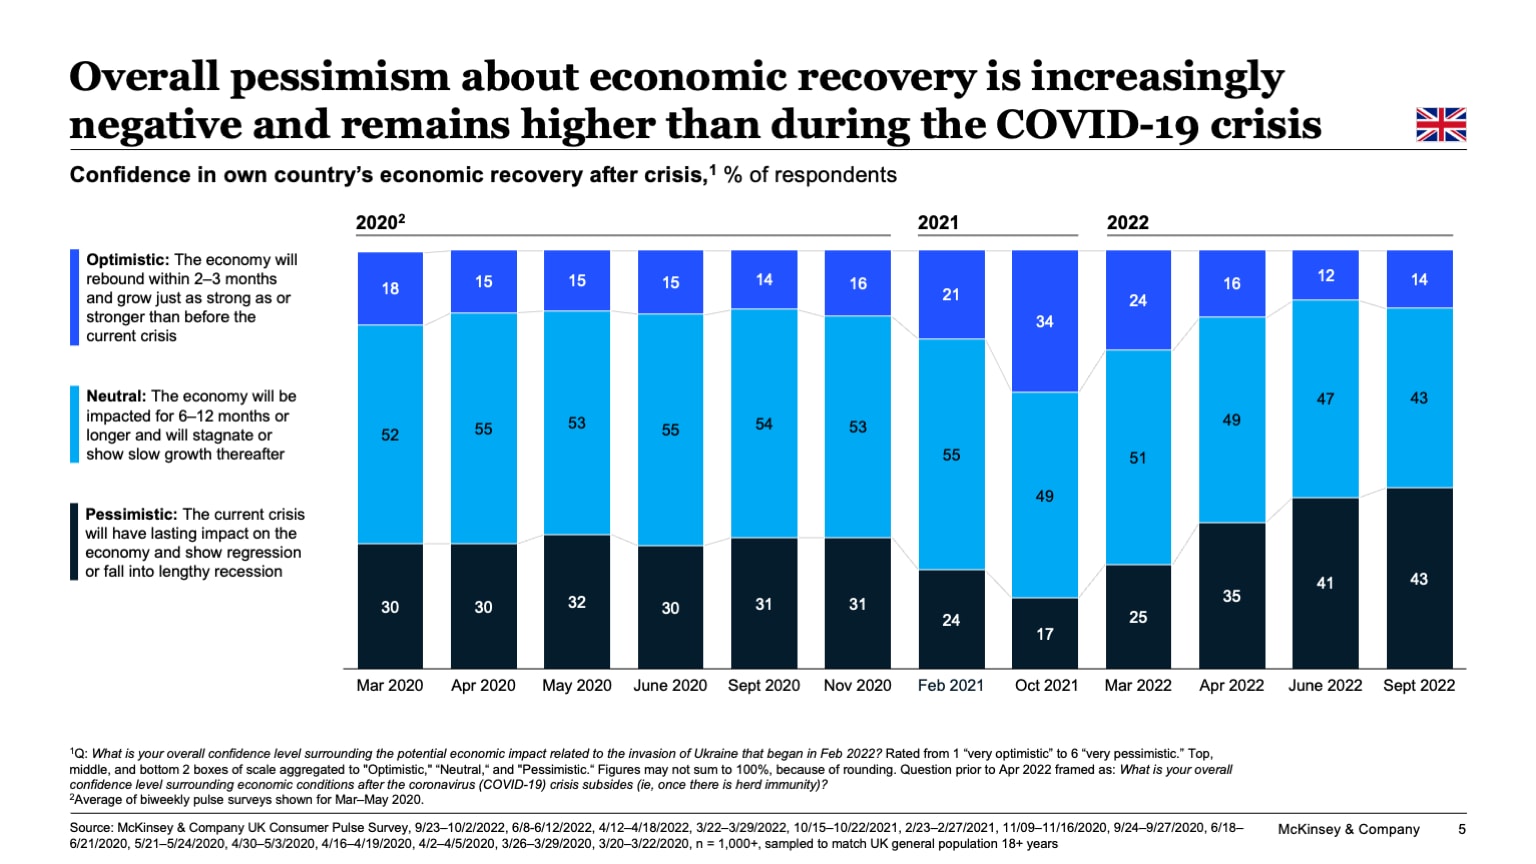 Overall pessimism about economic recovery is increasingly negative and remains higher than during the COVID-19 crisis